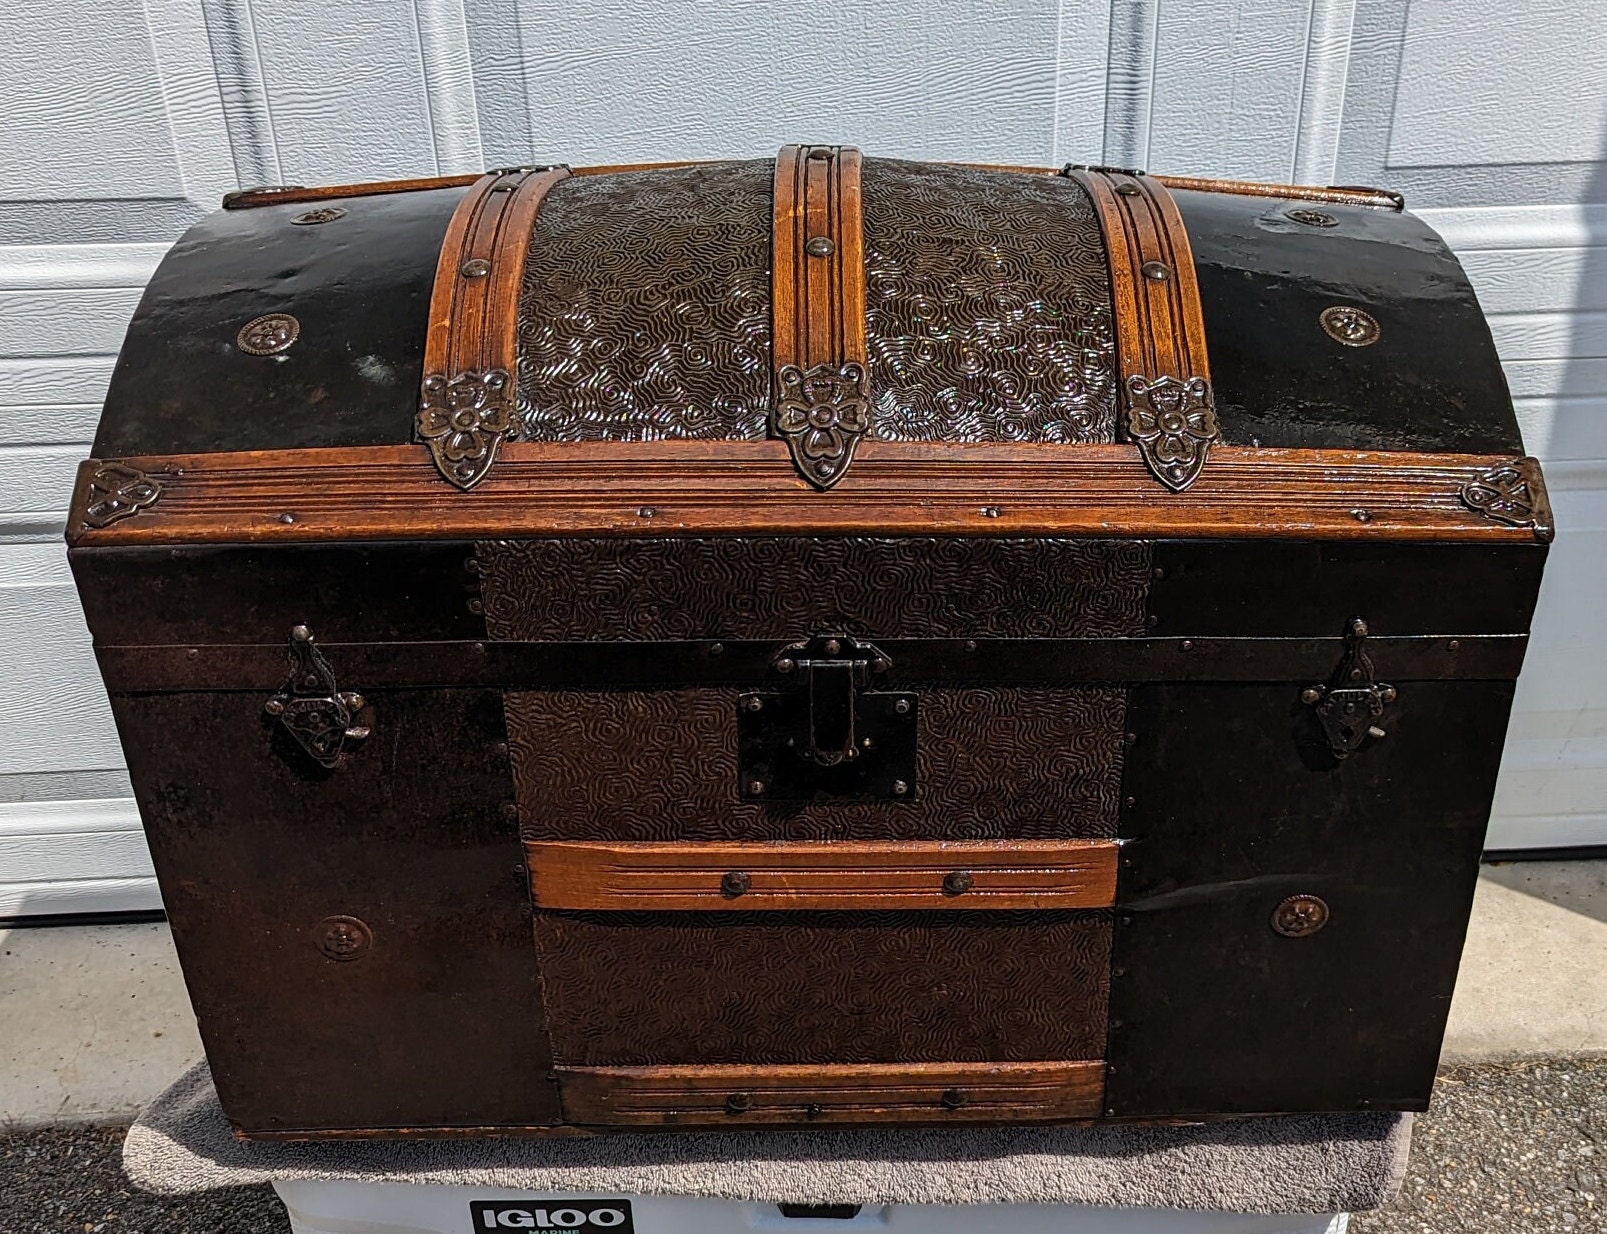 Rare Antique Steamer Trunk or Traveling Dresser made by Corbin Cabinet Co.  Lock